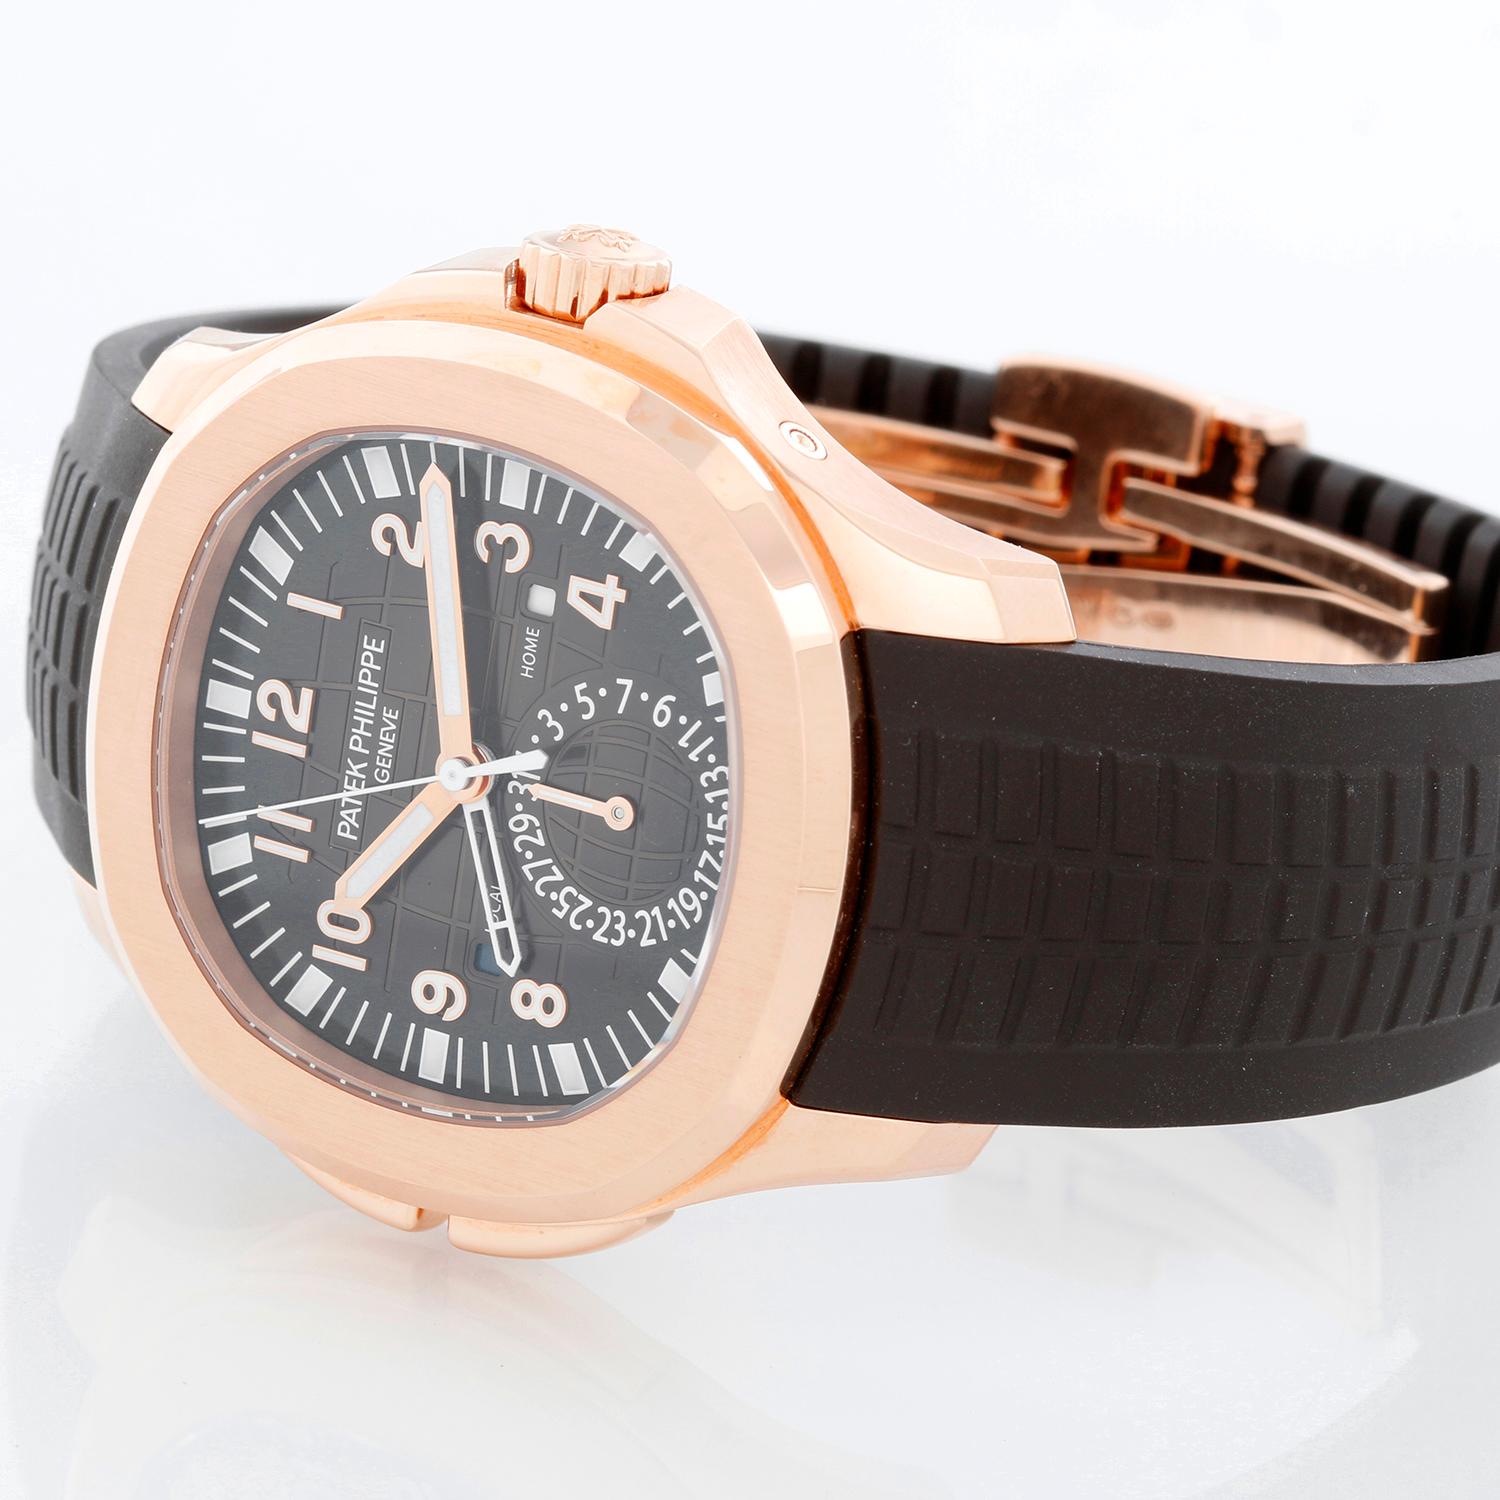 Patek Philippe Aquanaut Travel Time 18K Rose Gold Mens 5164R (5164 R ) - Self-winding / Automatic winding. 18K Rose gold with exposition back ( 40 mm ). Brown waffle dial with gold applied numerals with luminescent coating. Dark brown polymer